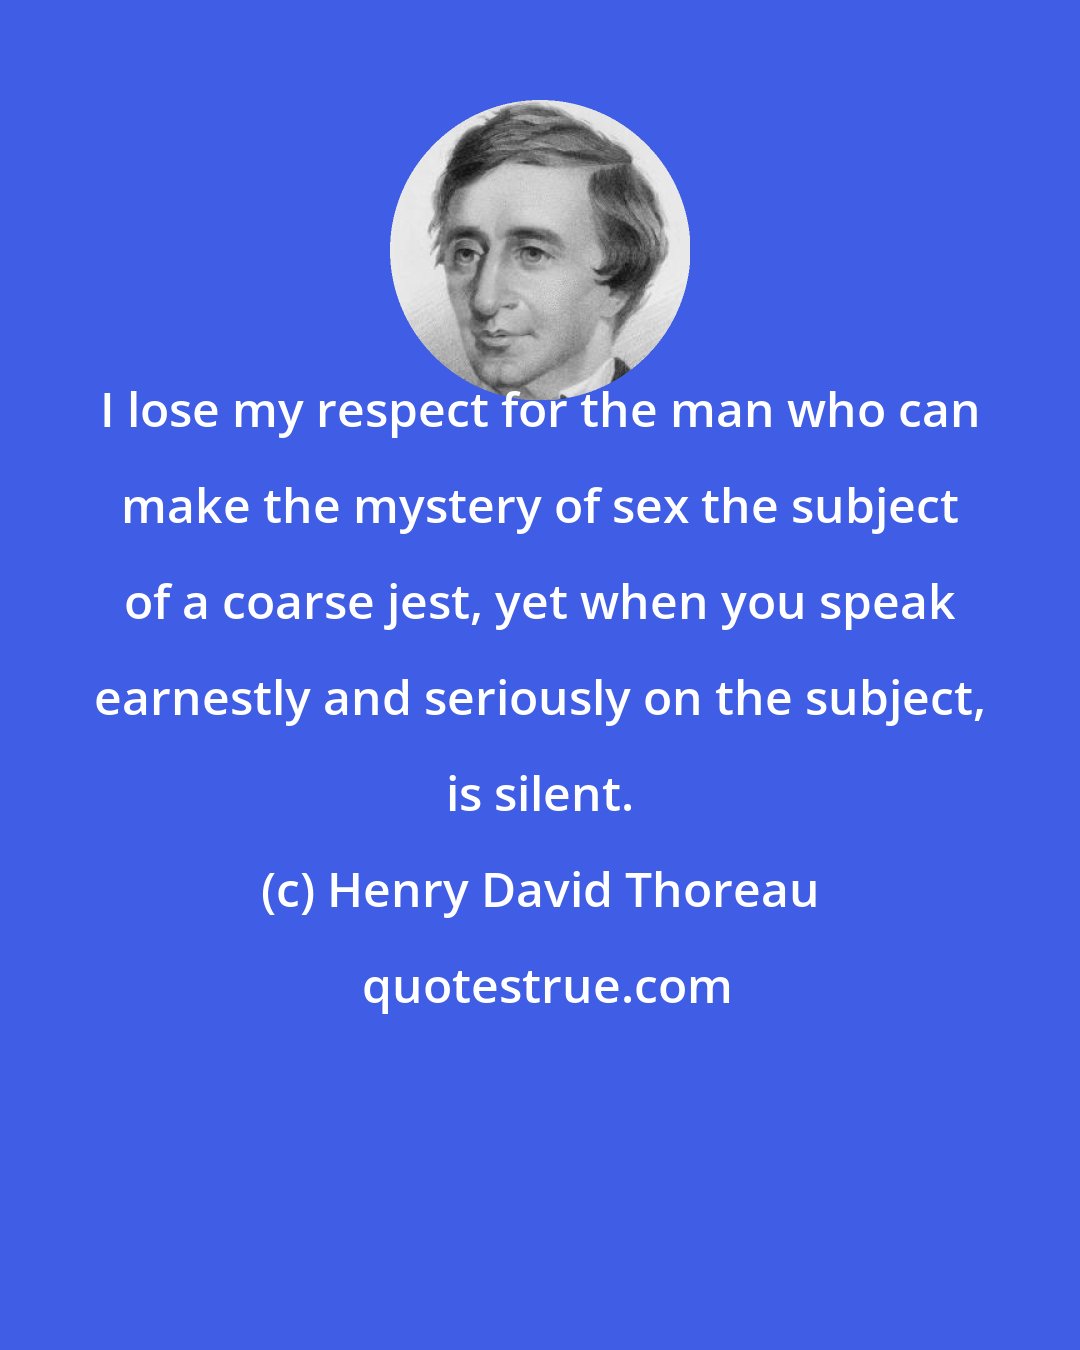 Henry David Thoreau: I lose my respect for the man who can make the mystery of sex the subject of a coarse jest, yet when you speak earnestly and seriously on the subject, is silent.